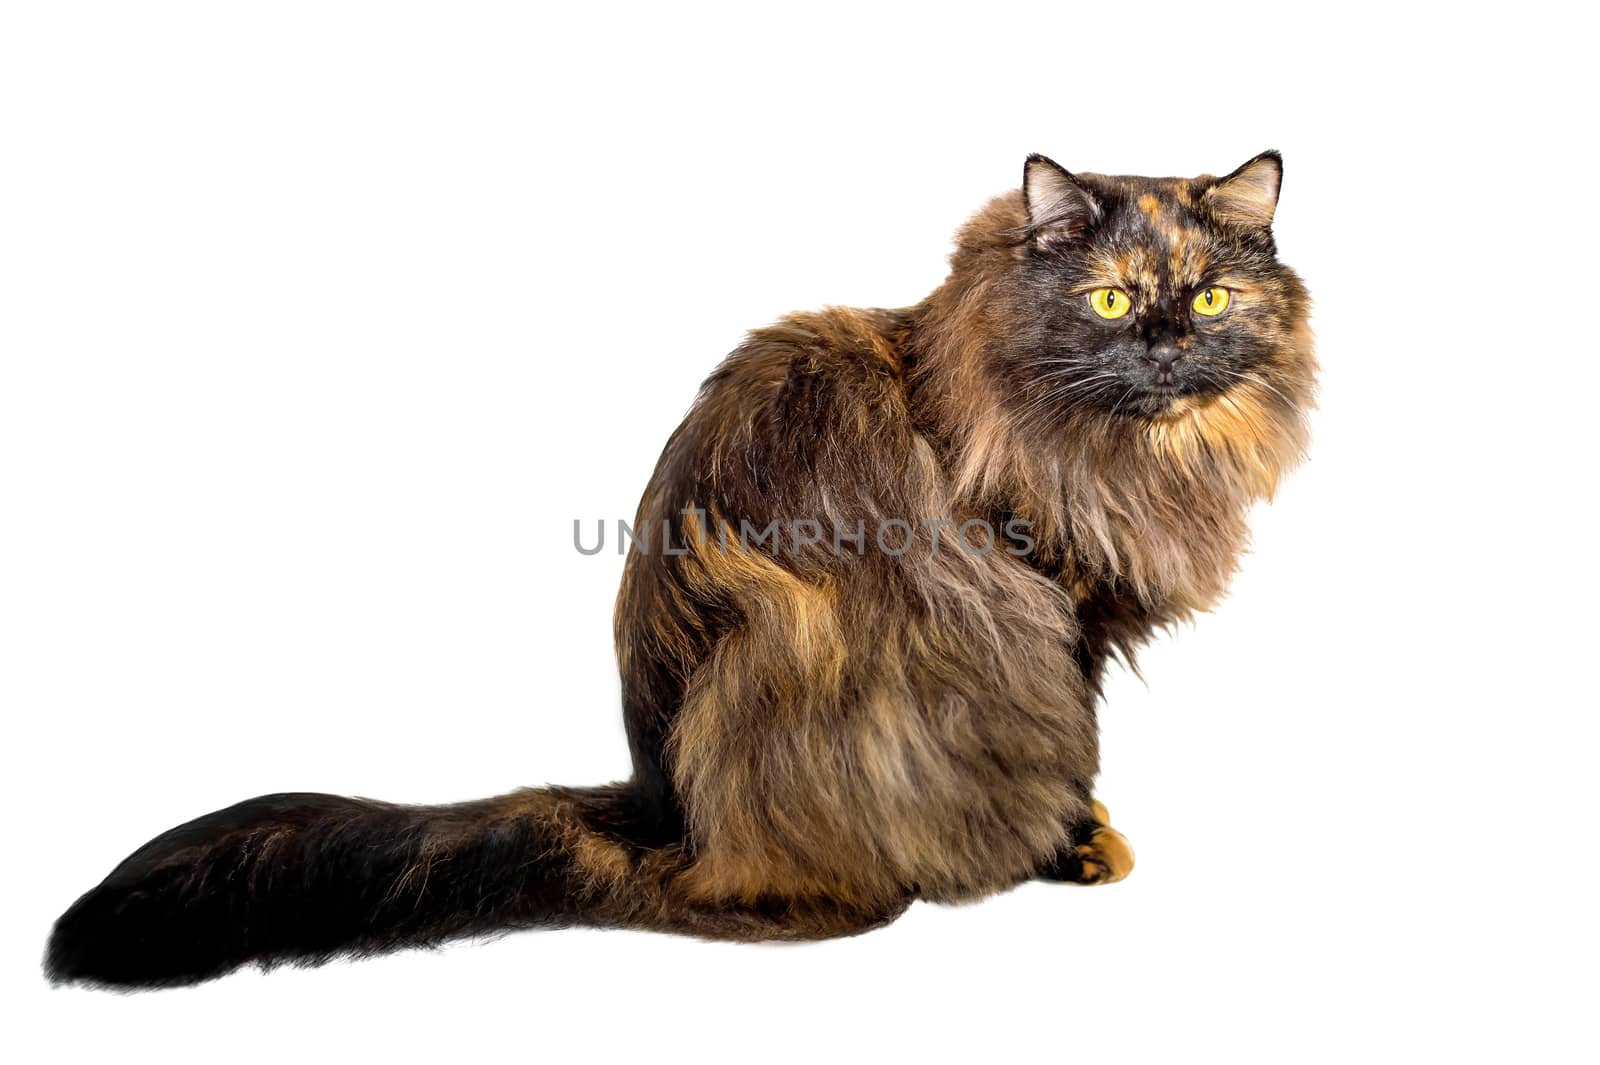 Adult cat tortoiseshell coloring, isolated. Cute tricolor cat on a white background. Studio photography cut out for design or advertising